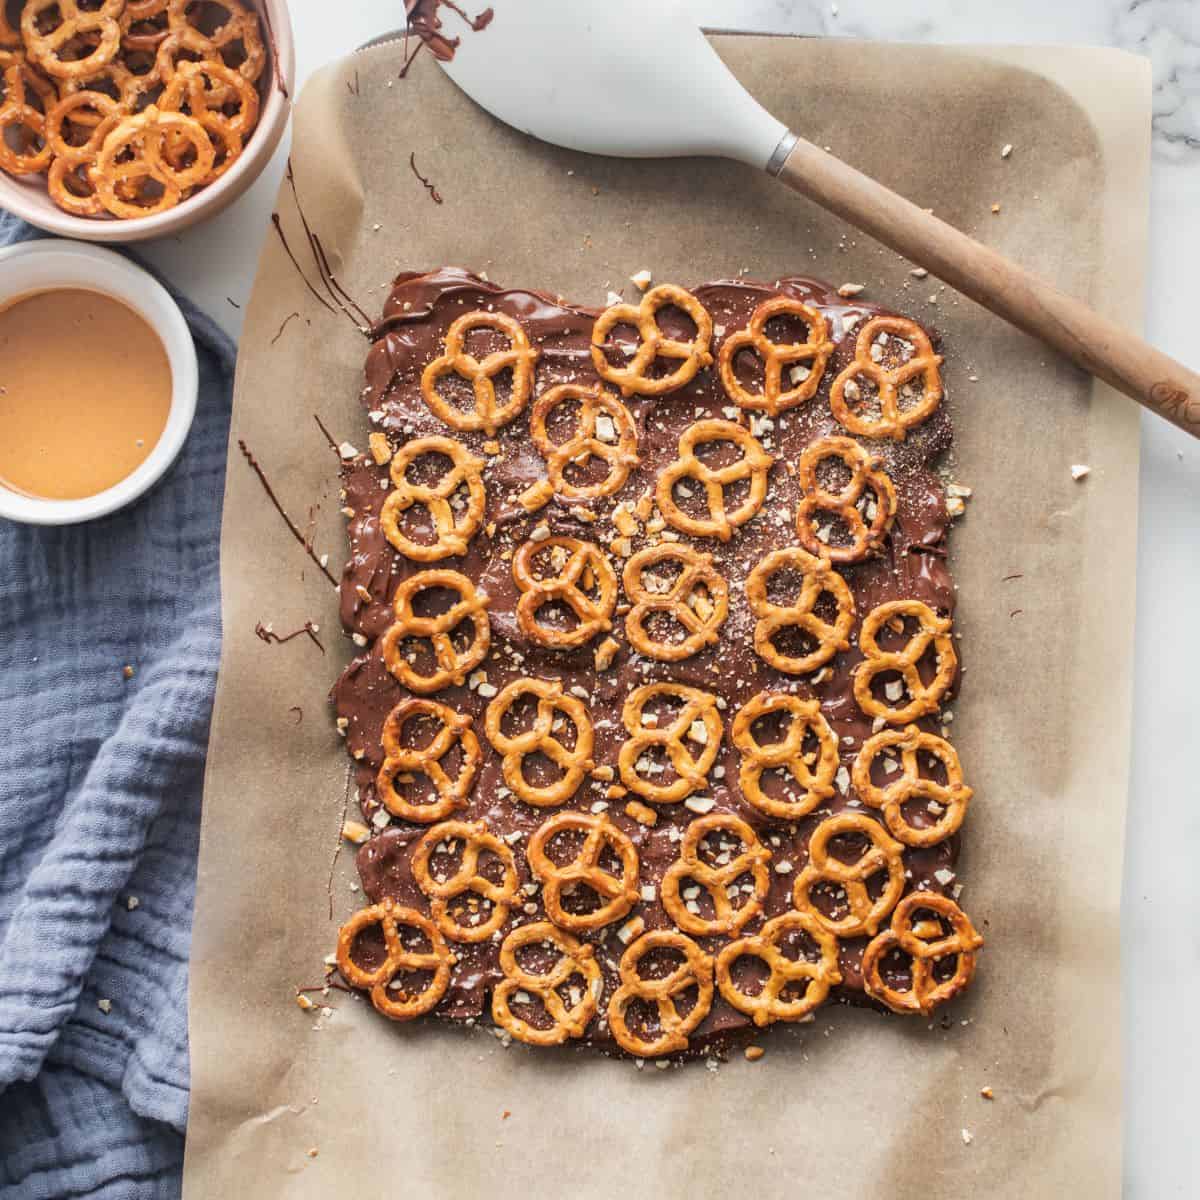 Crushed and whole pretzels spread over melted chocolate making date bark.